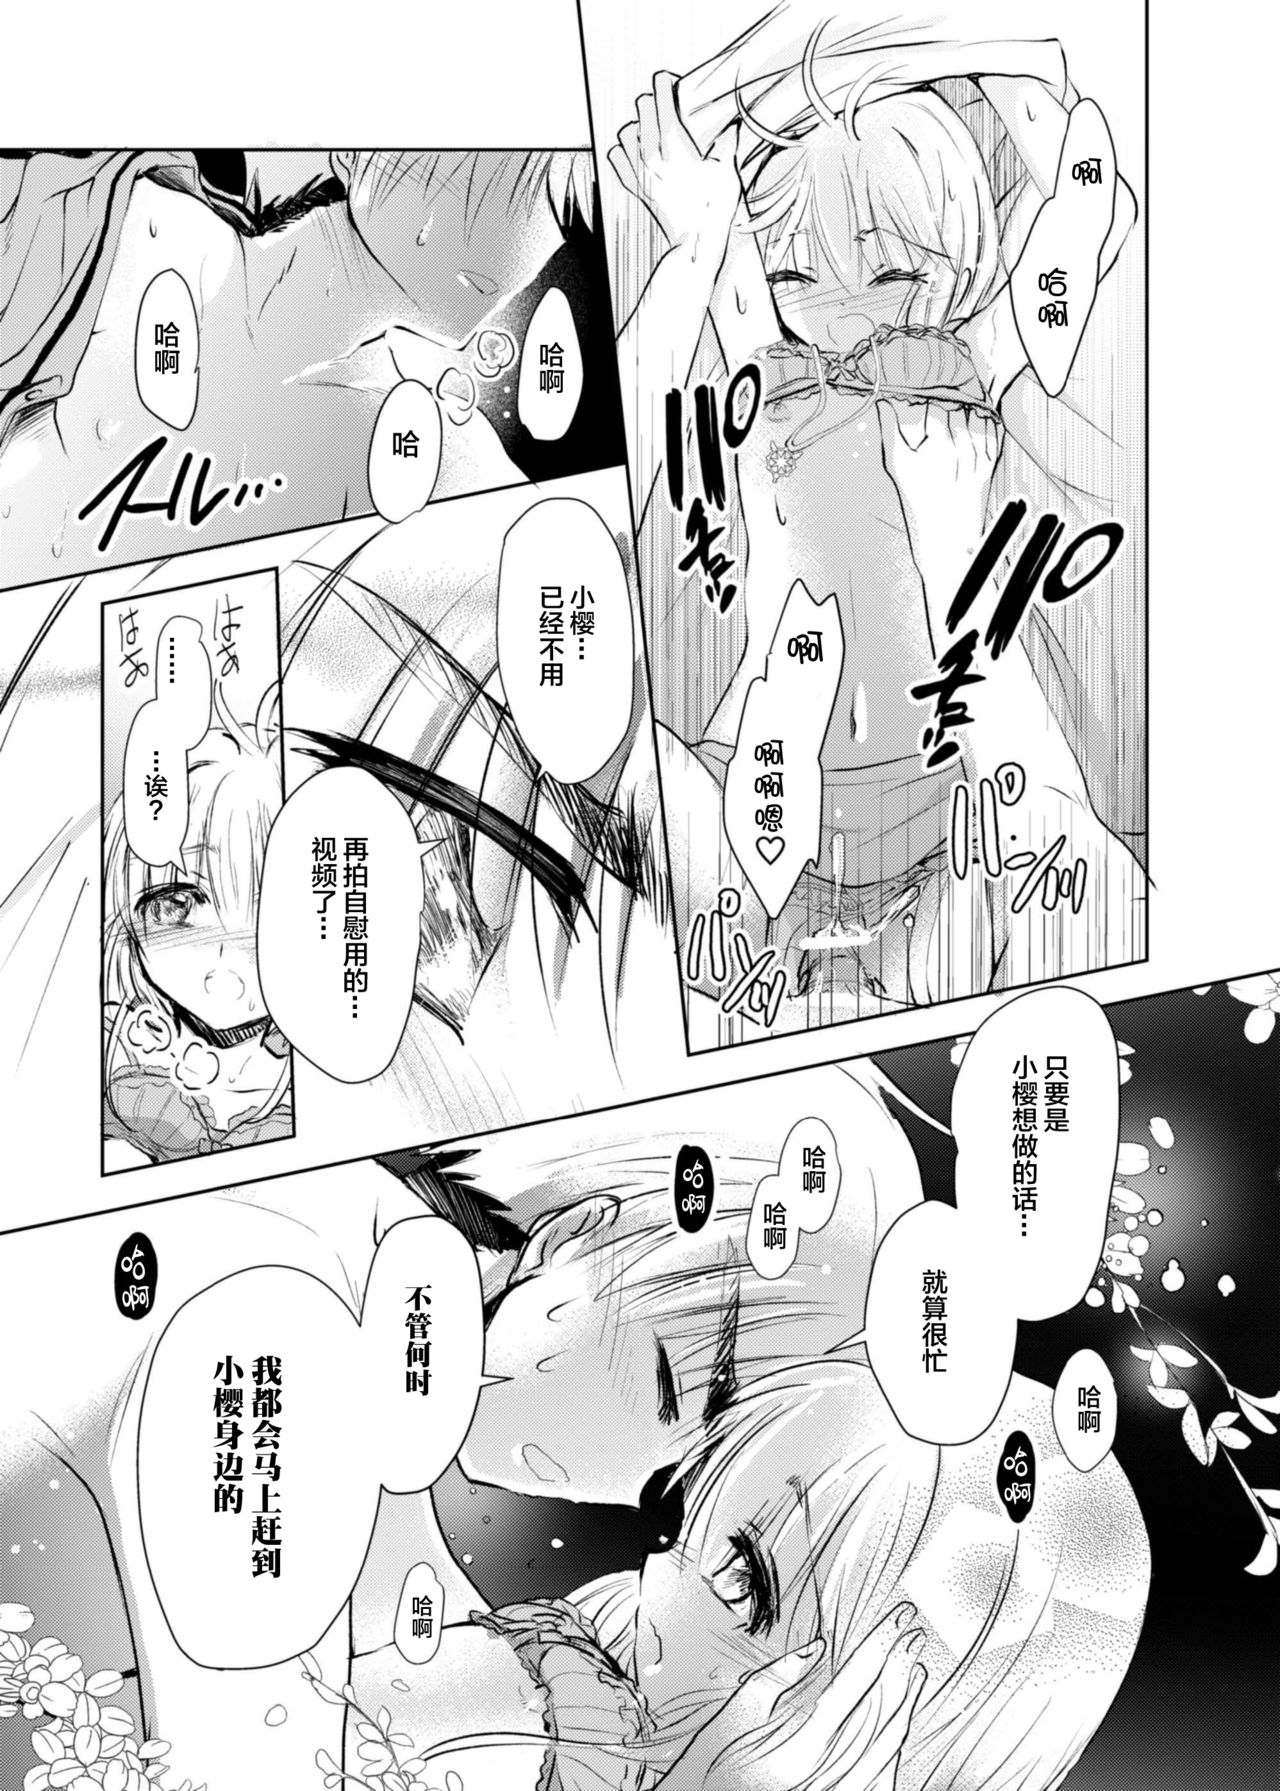 [Maple of Forest (Kaede Sago)] Give and Take (Cardcaptor Sakura) [Chinese] [新桥月白日语社] [Digital] page 26 full